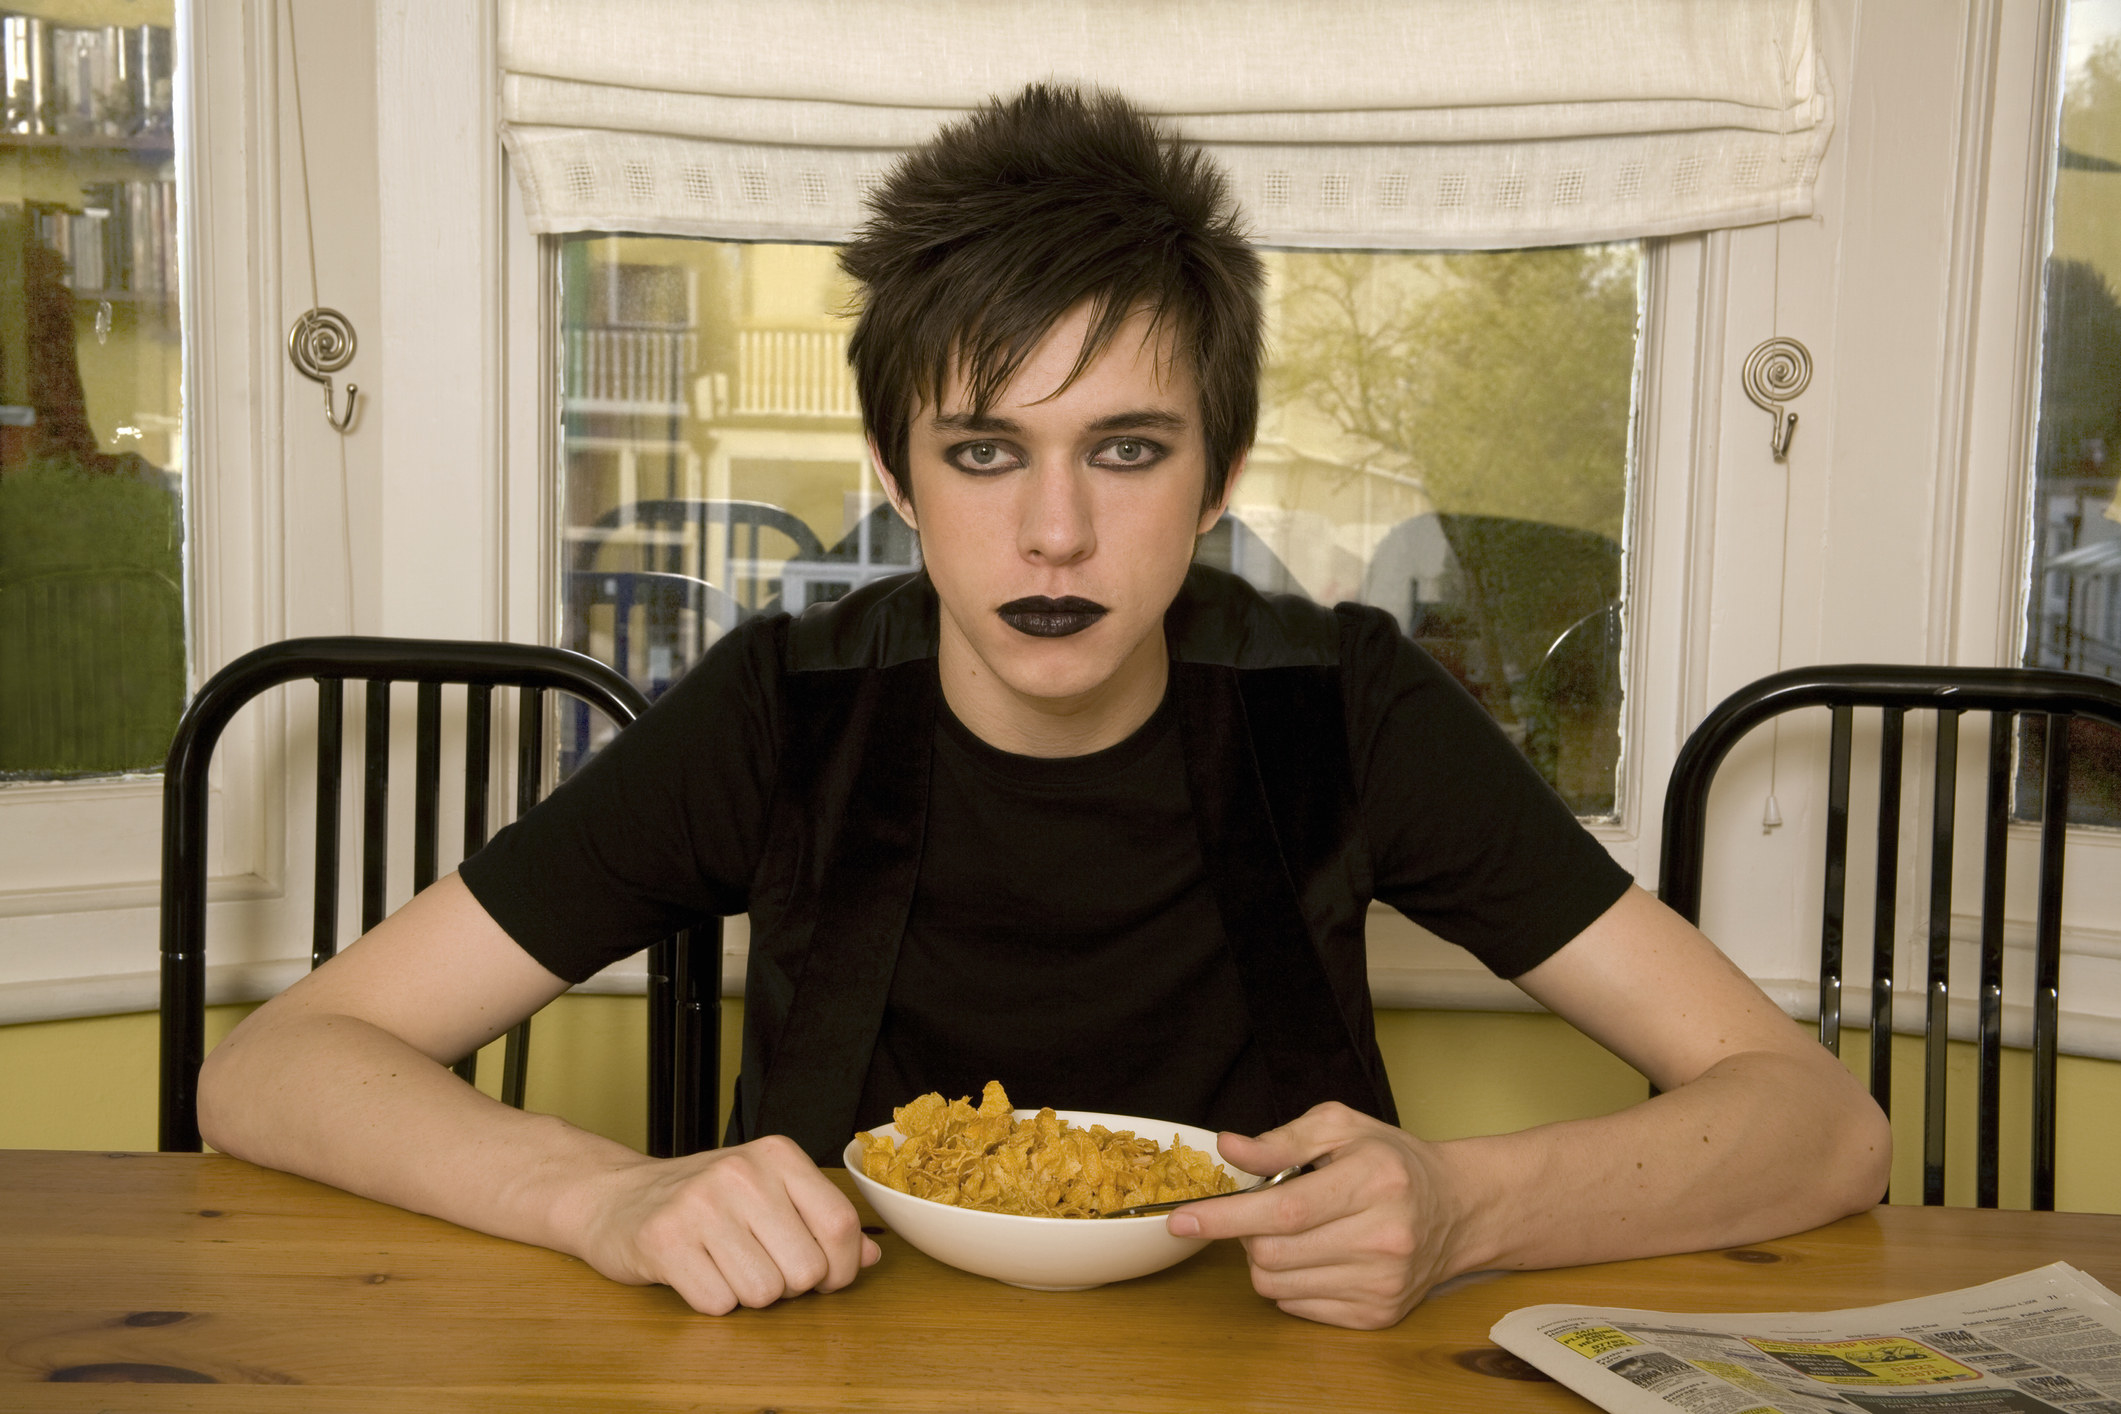 goth kid eating cereal